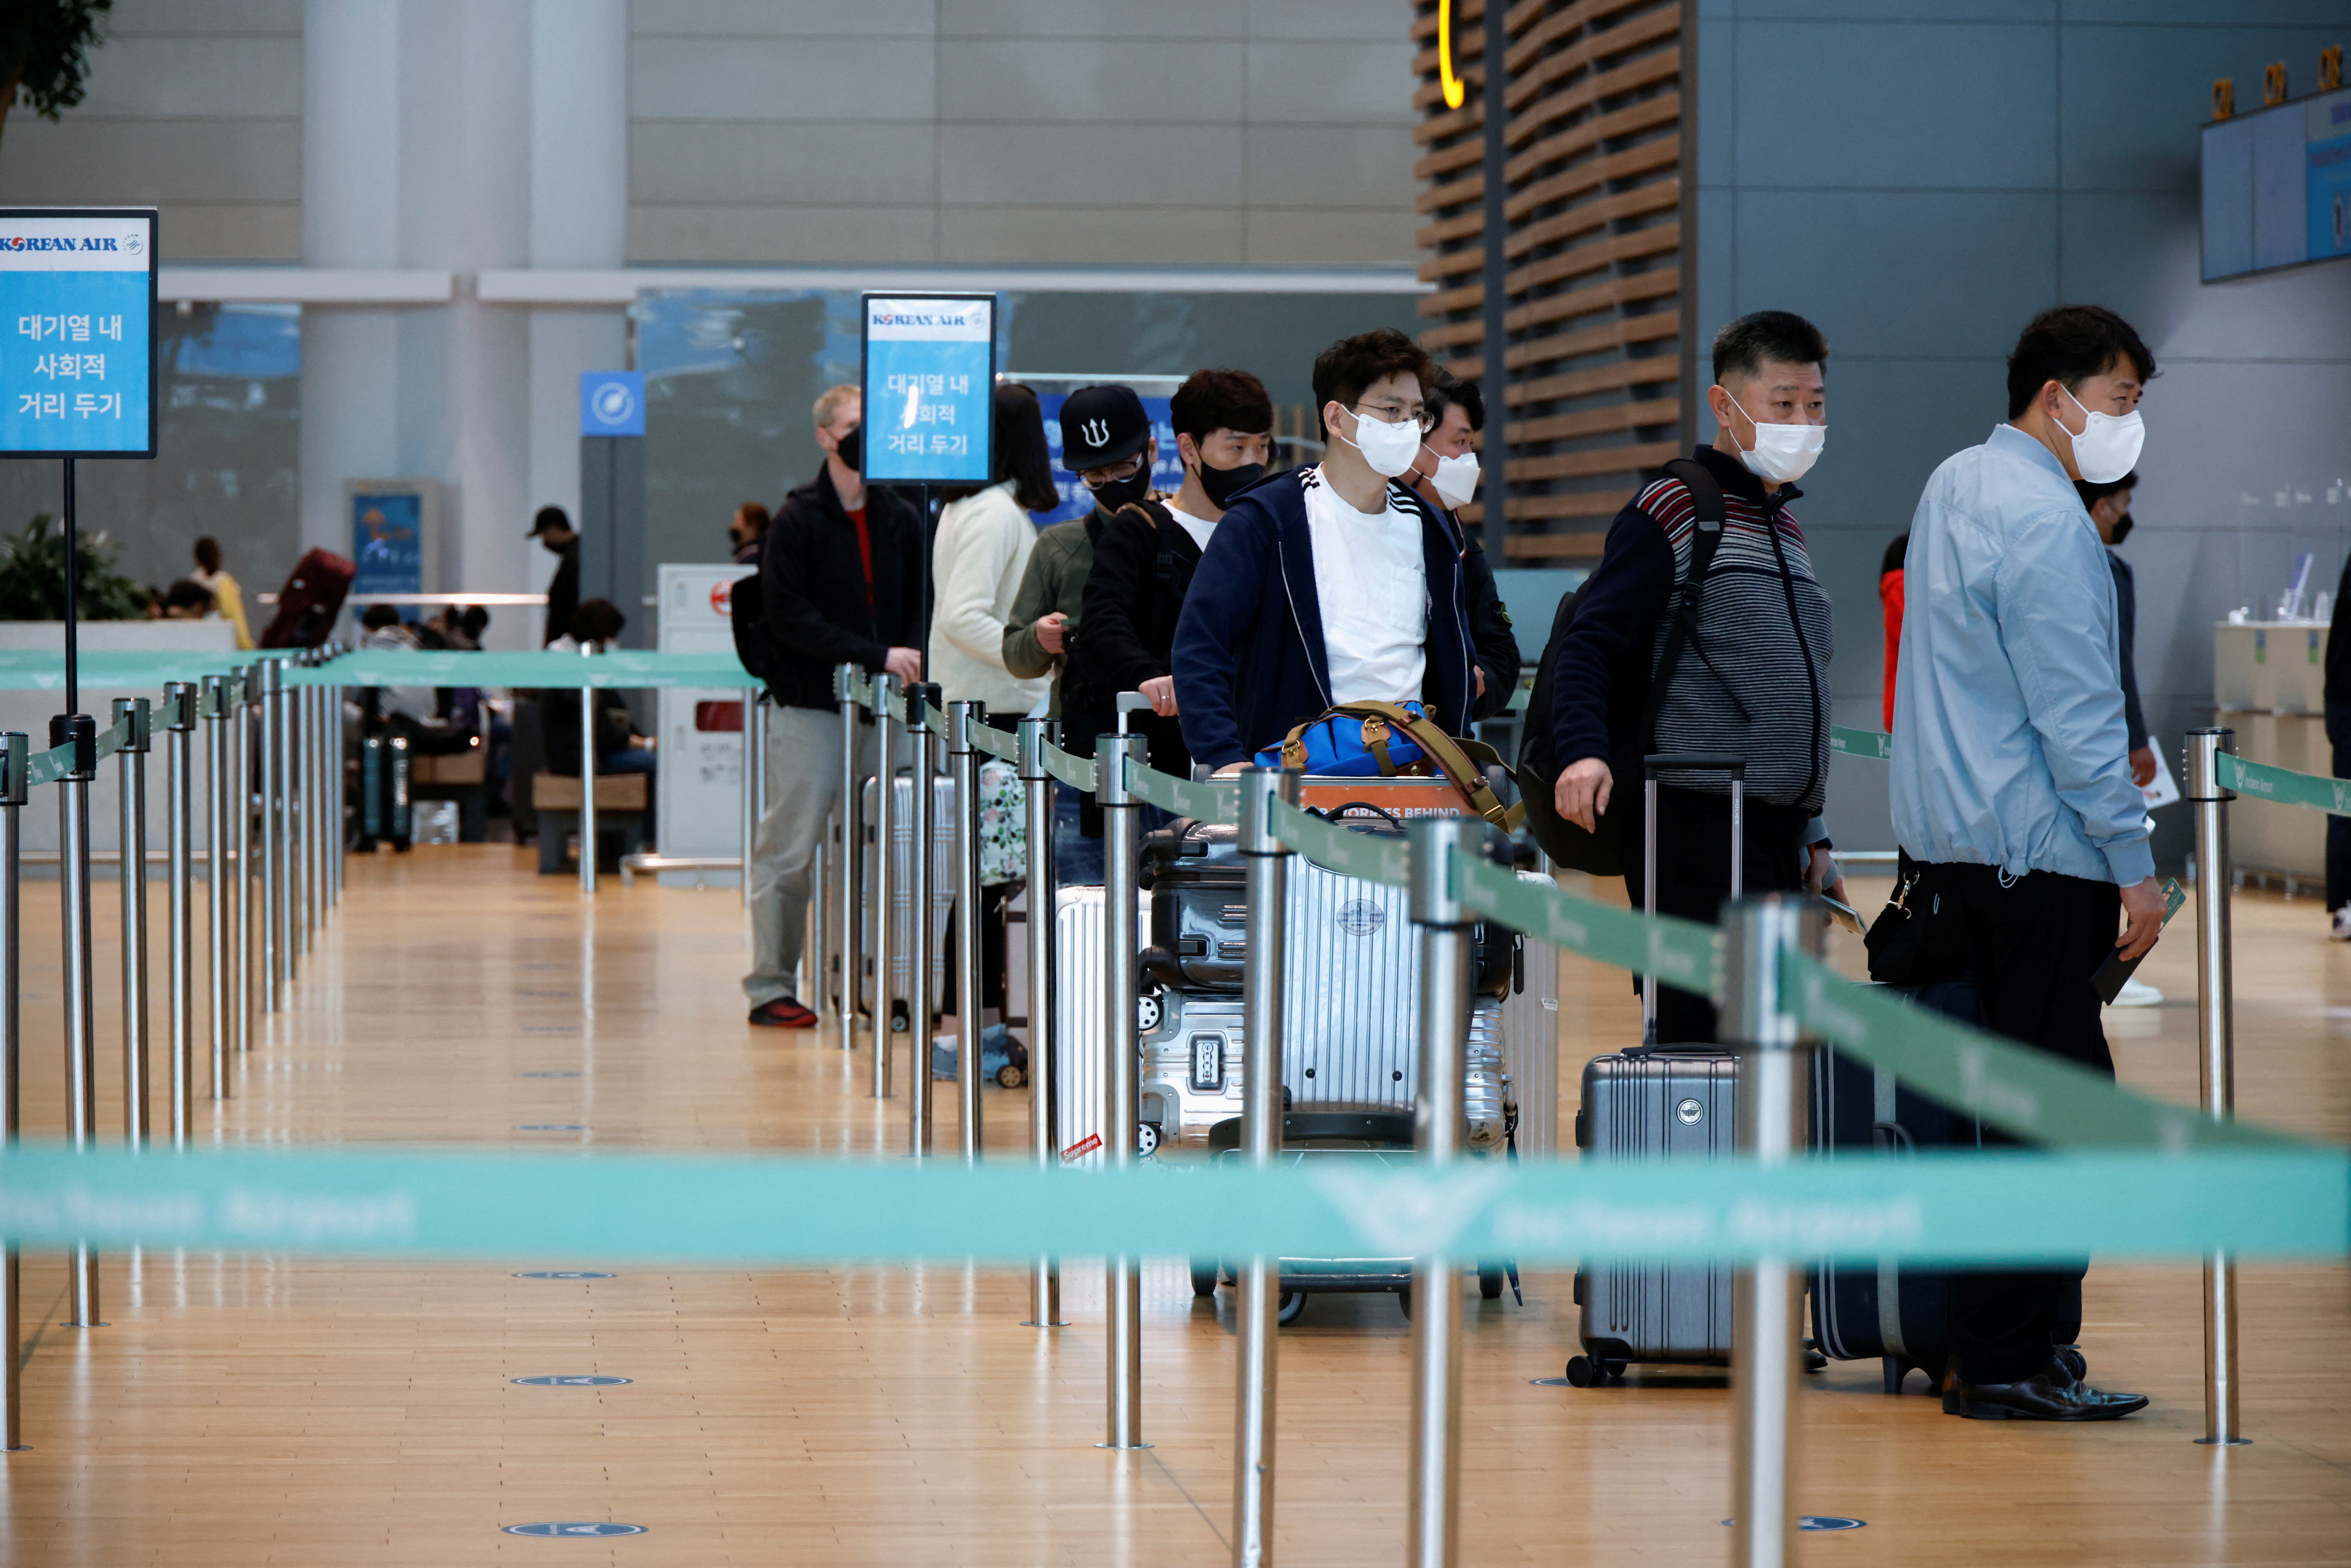 People wearing face masks to prevent from contracting the coronavirus disease (COVID-19) wait in line to check in at Incheon International Airport, in Incheon, South Korea